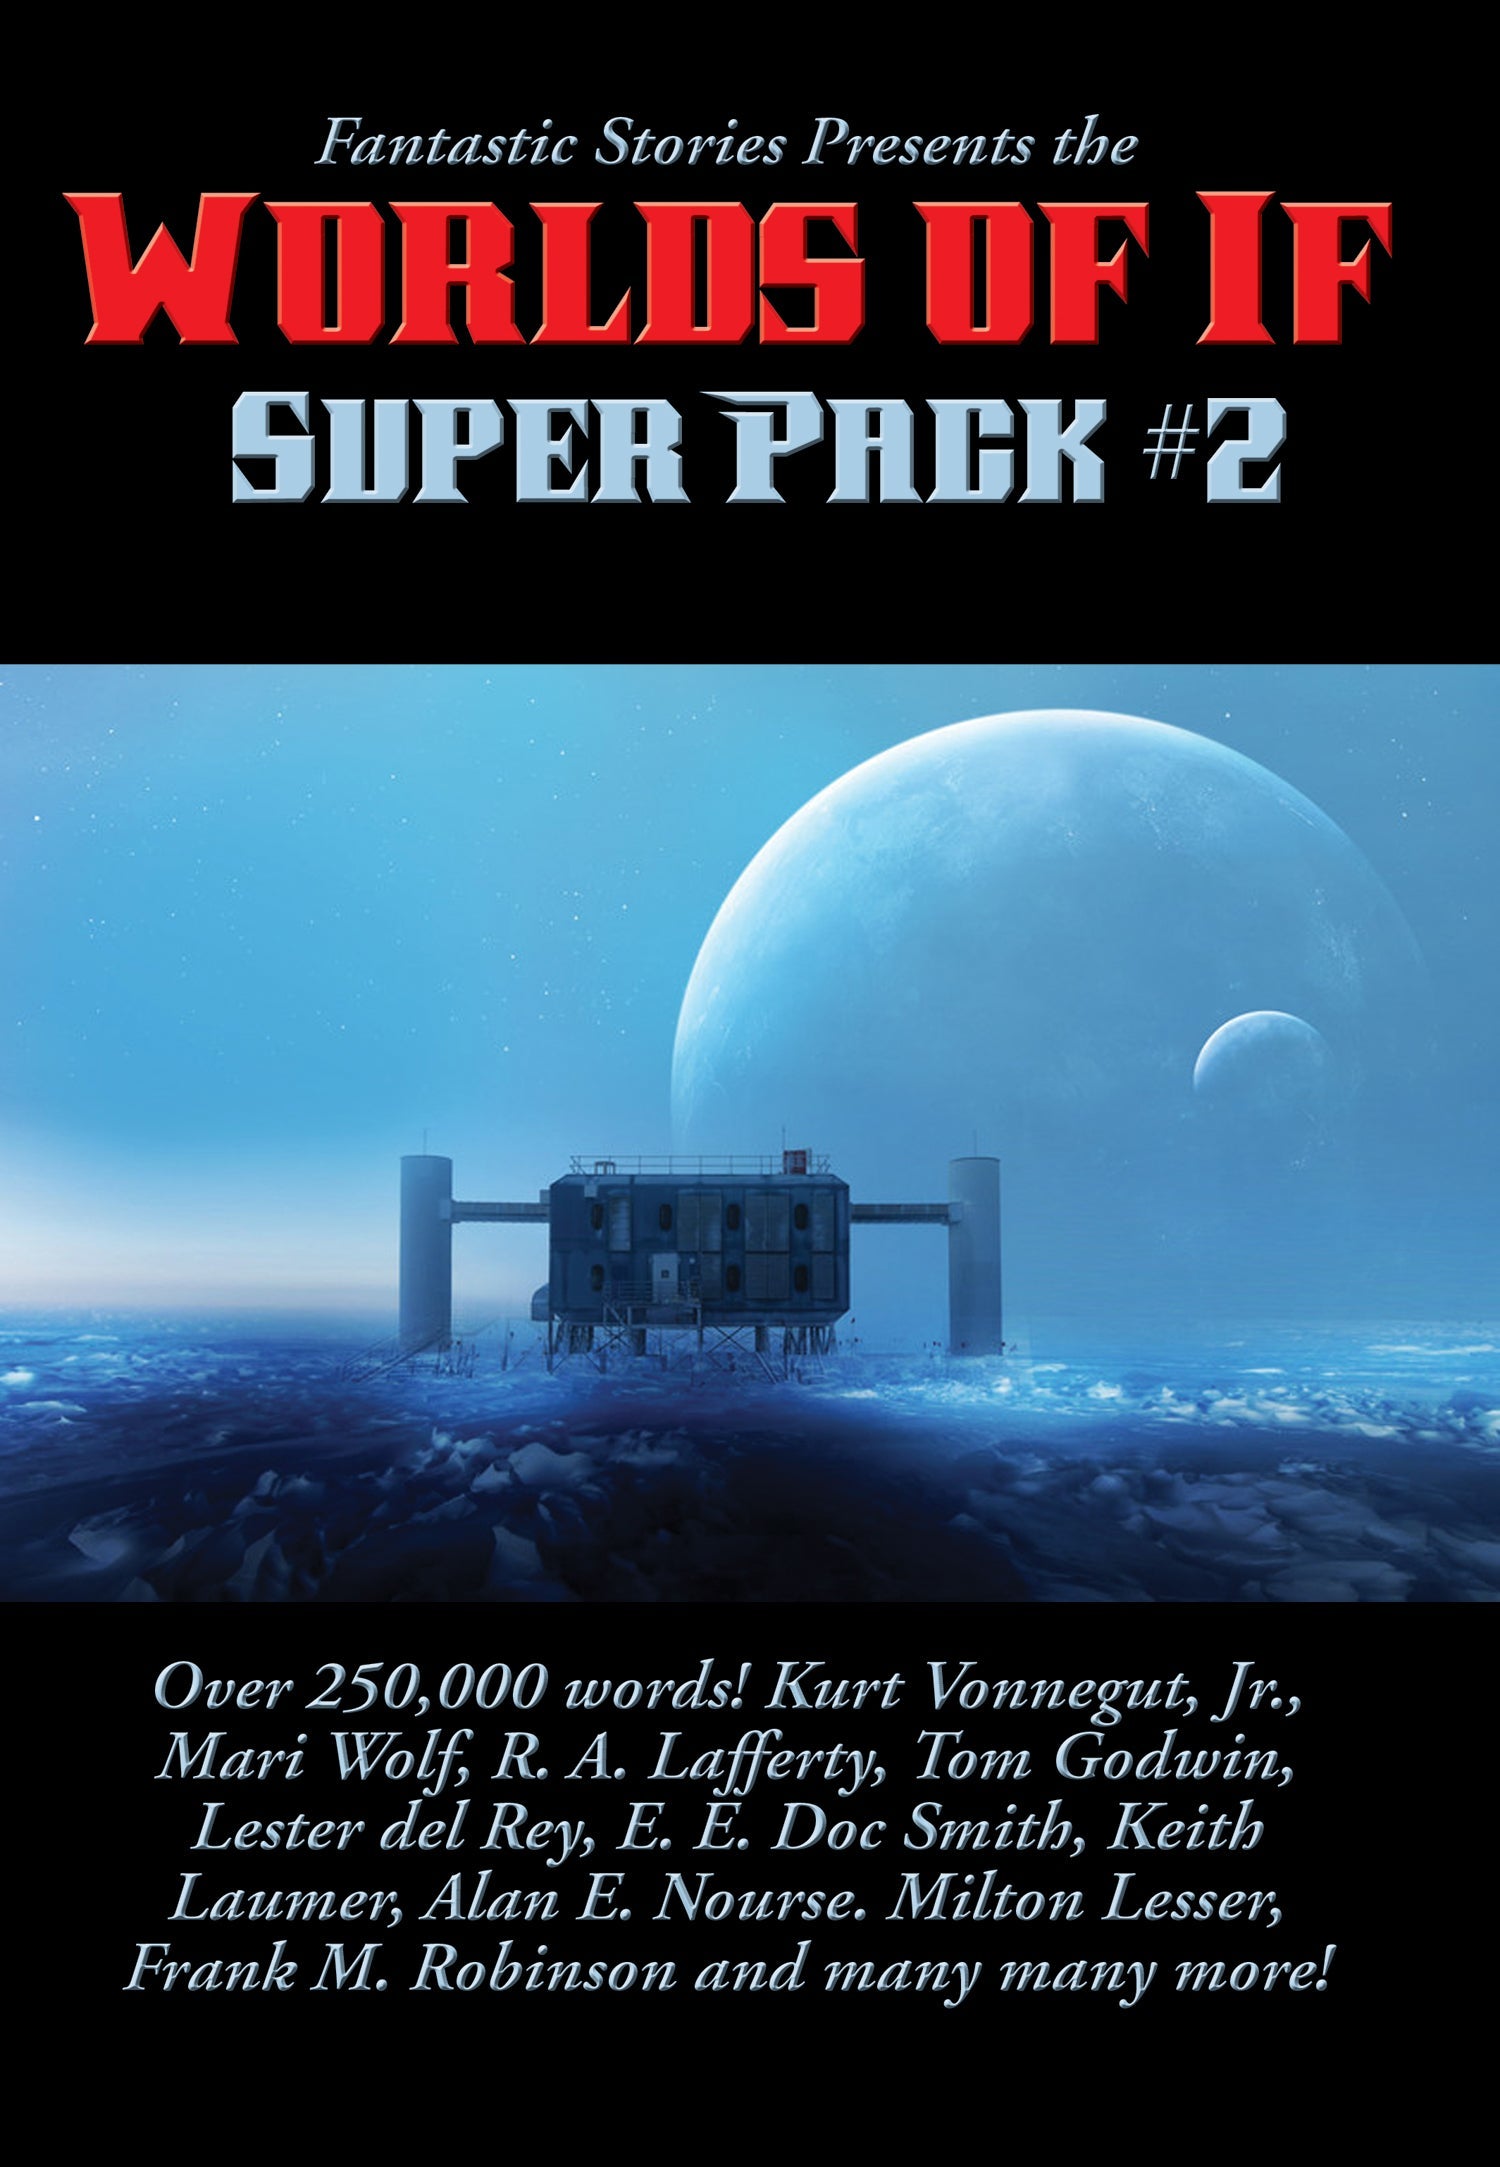 Cover art for Positronic Super Pack #30, the second Worlds of If Super Pack.